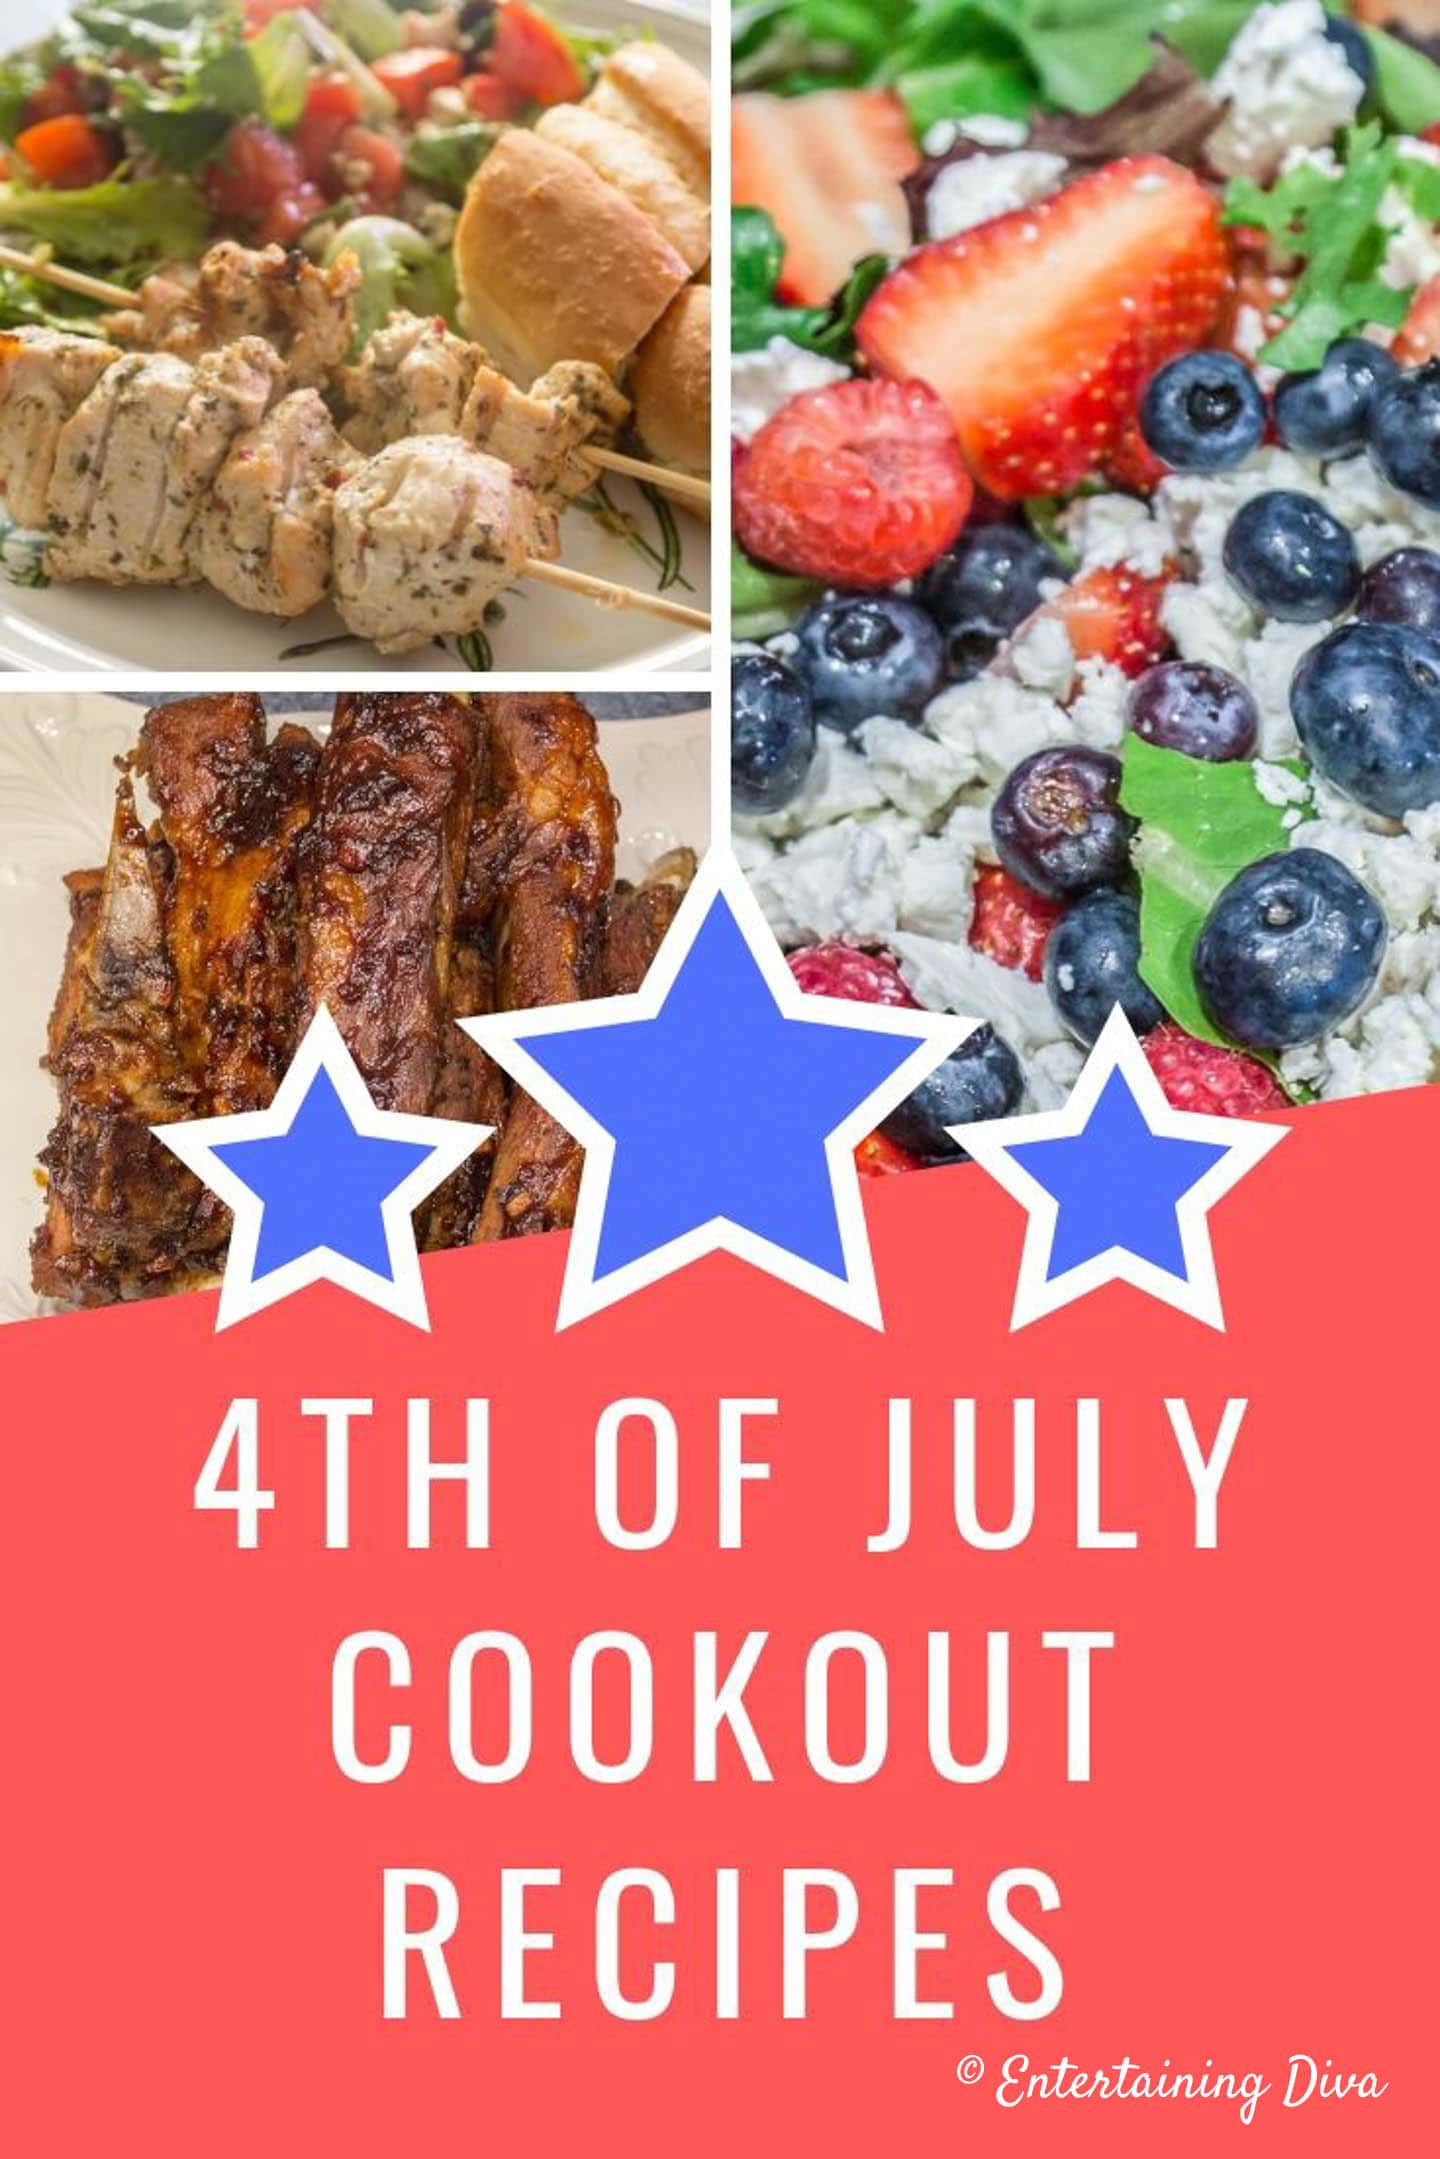 4th of July cookout recipes